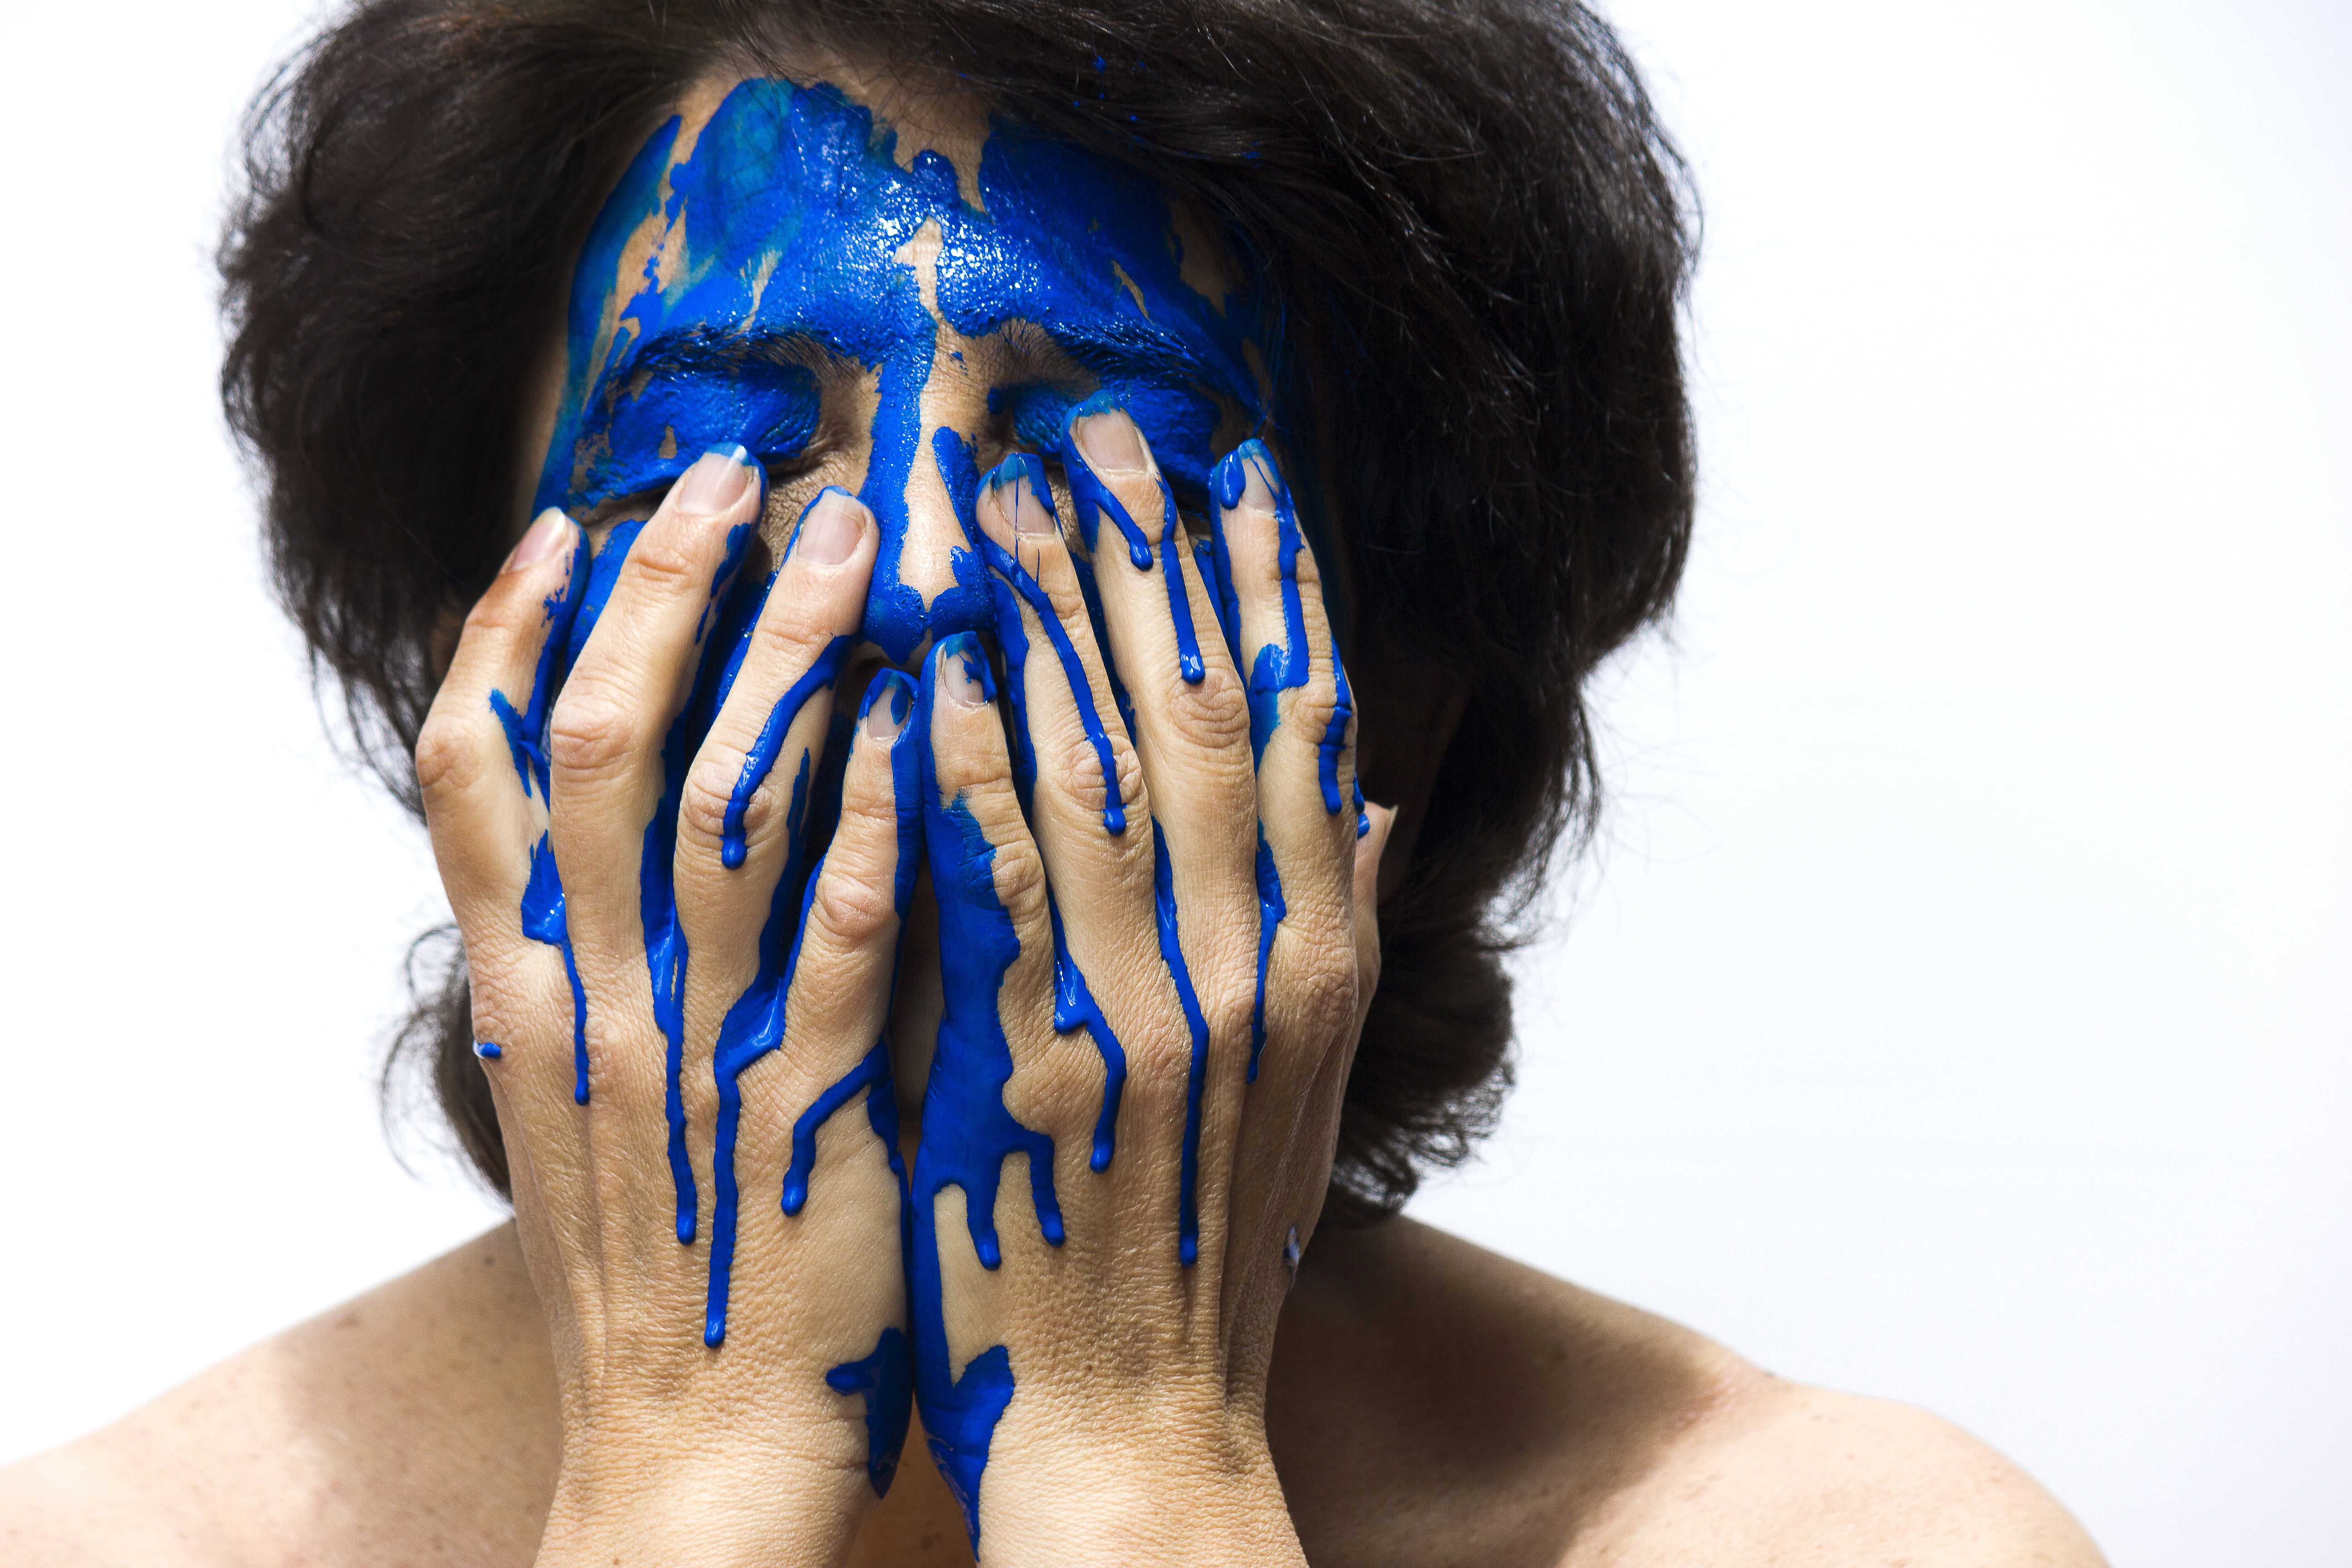 Woman with blue face paint wallpaper | Wallpaper Flare